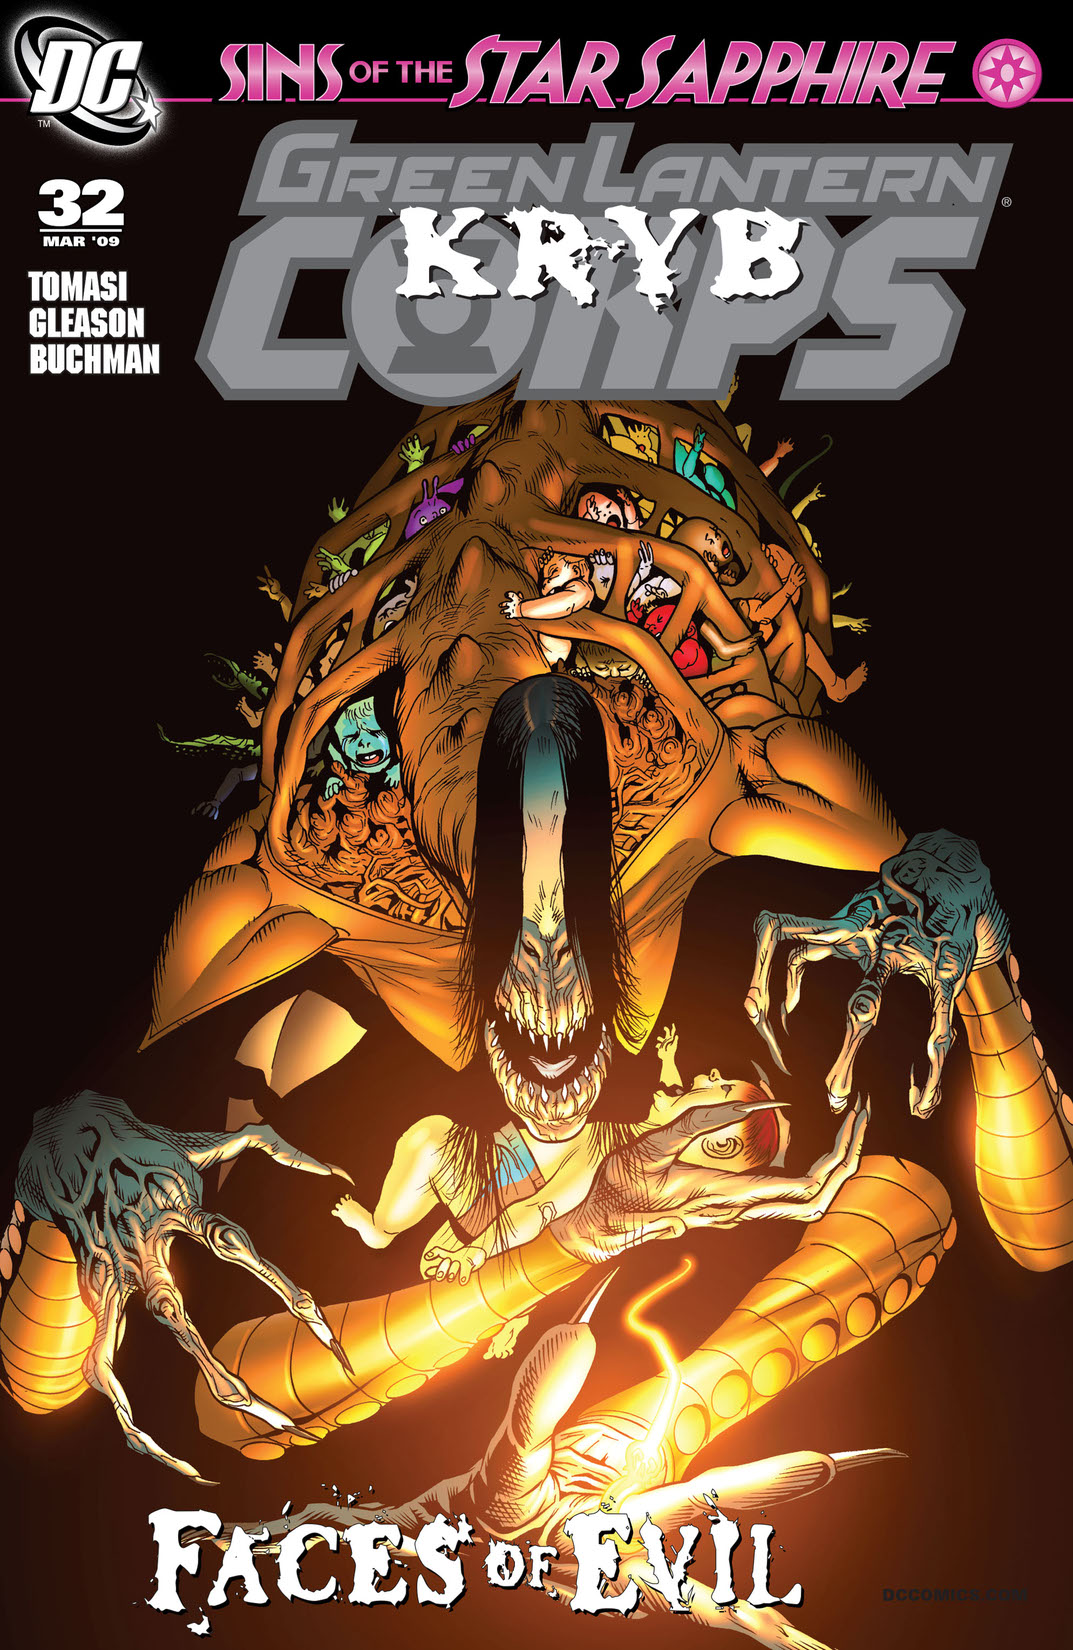 Green Lantern Corps (2006-) #32 preview images